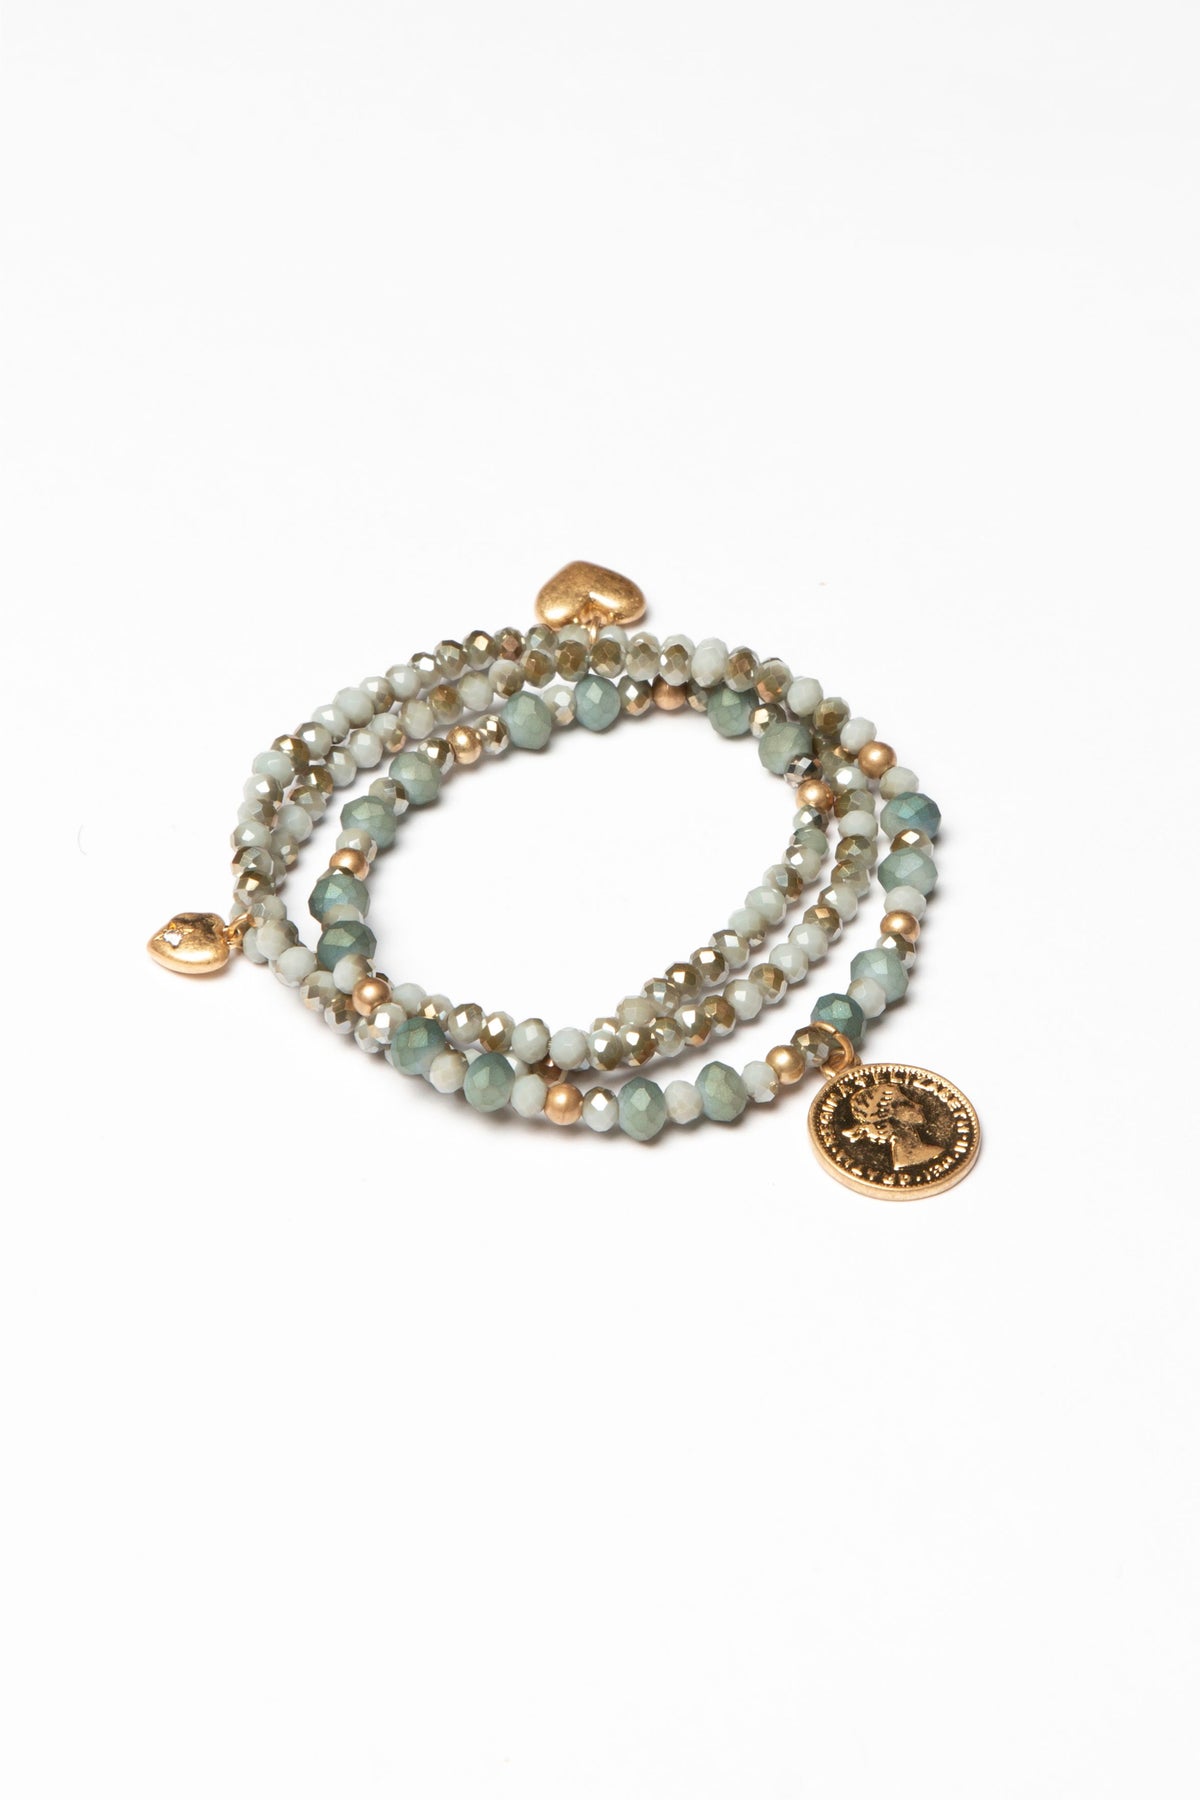 Grey Crystals With Gold Coin and Hearts Bracelet